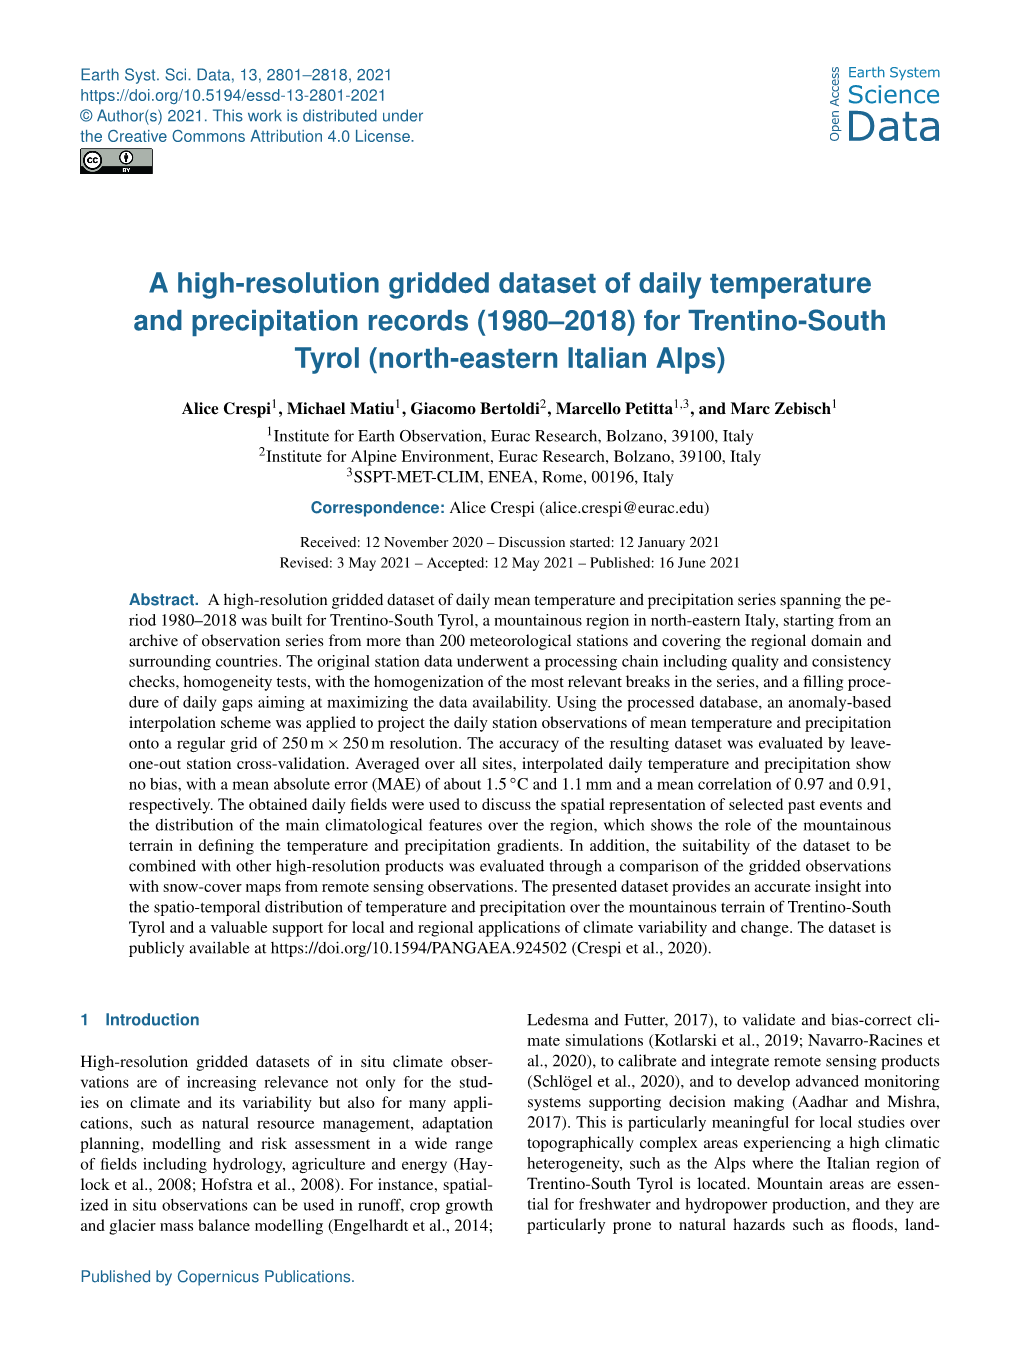 A High-Resolution Gridded Dataset of Daily Temperature and Precipitation Records (1980–2018) for Trentino-South Tyrol (North-Eastern Italian Alps)